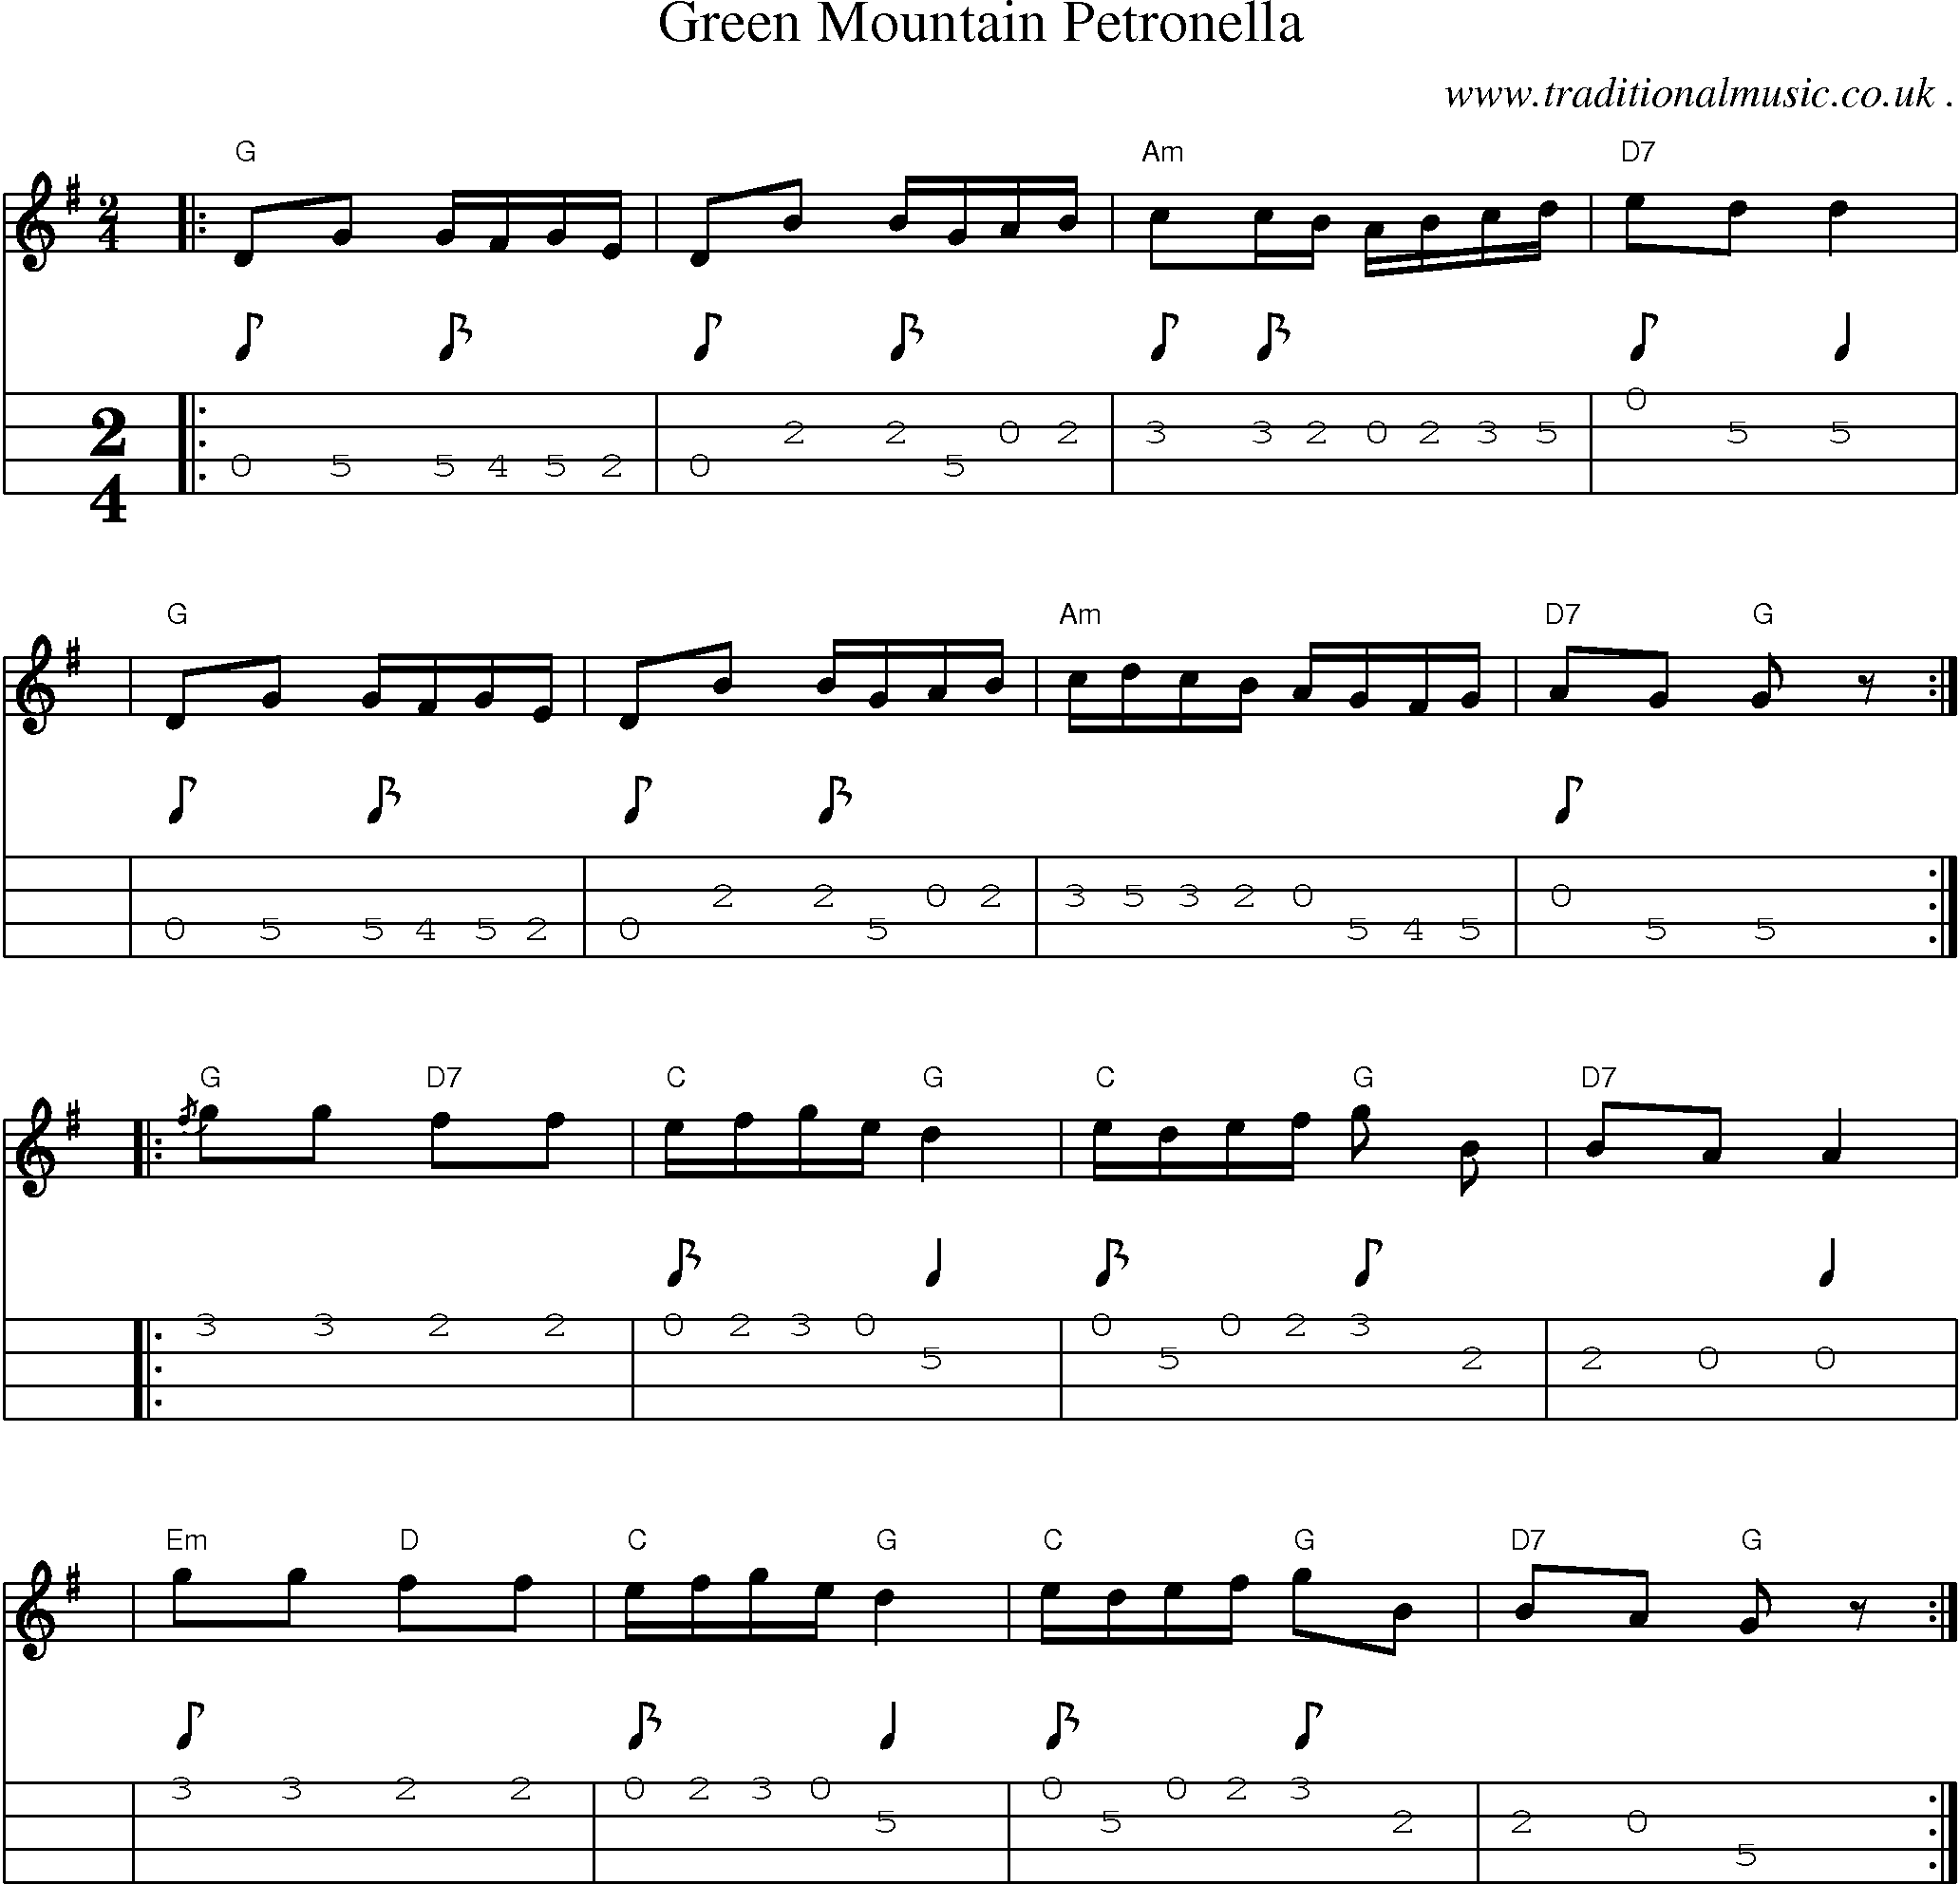 Sheet-music  score, Chords and Mandolin Tabs for Green Mountain Petronella